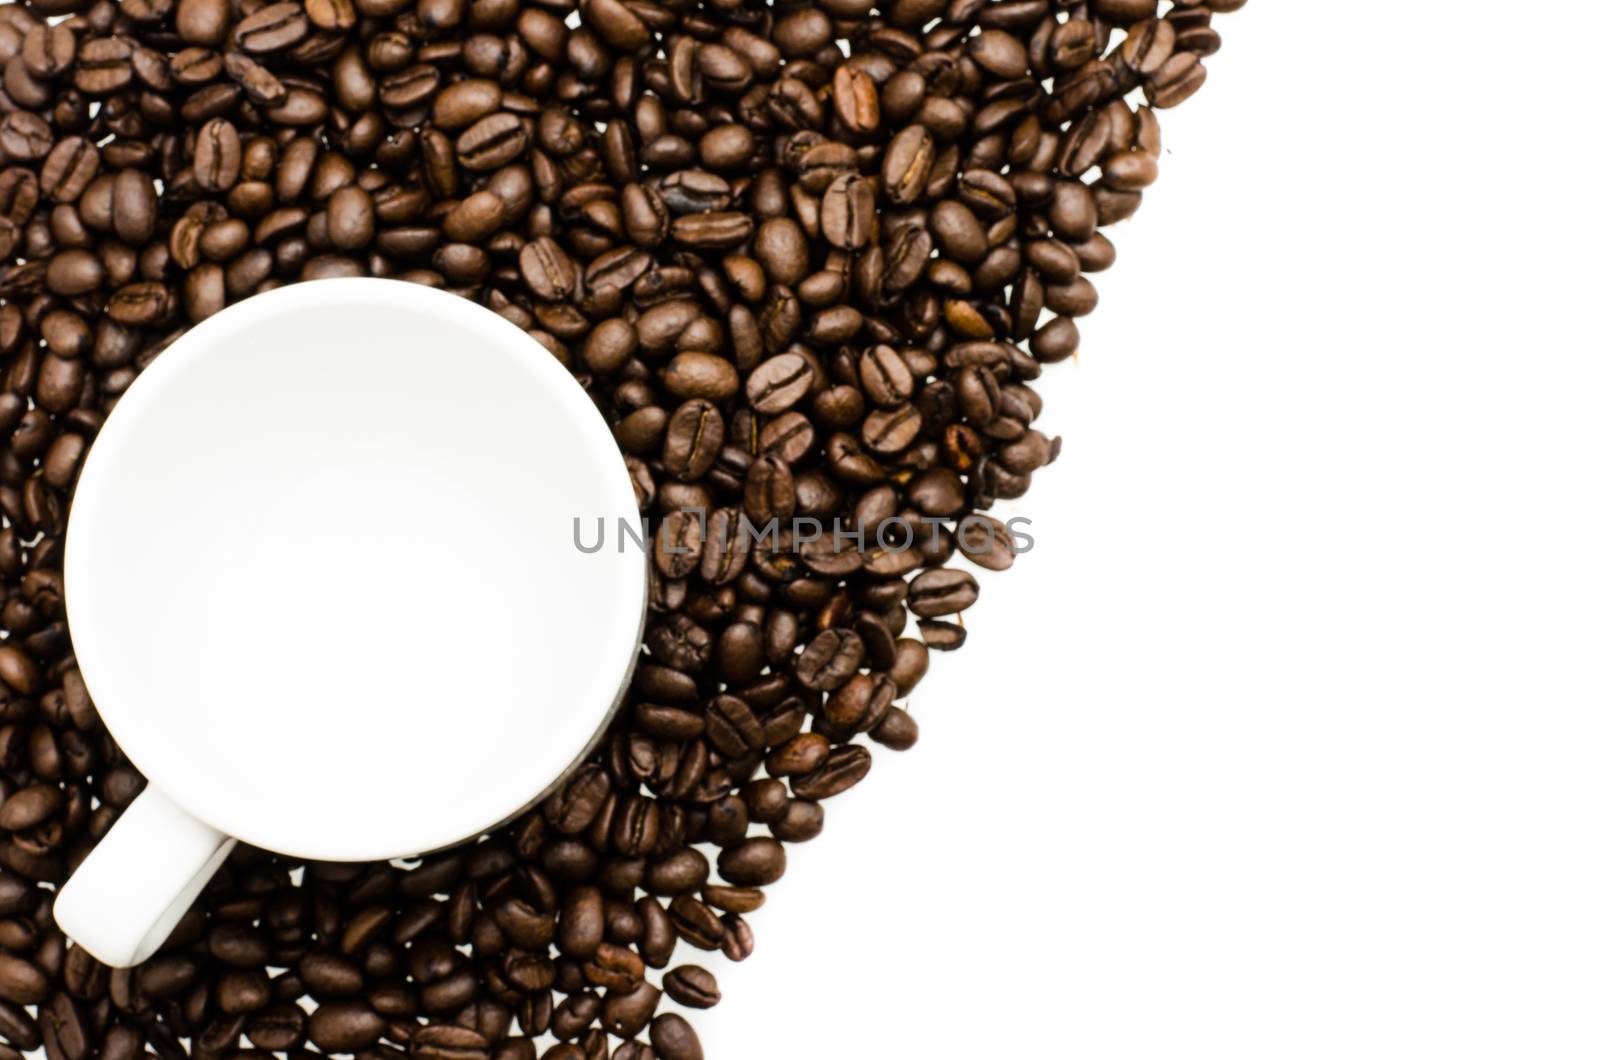 coffee cup  on coffee beans by photobyphotoboy